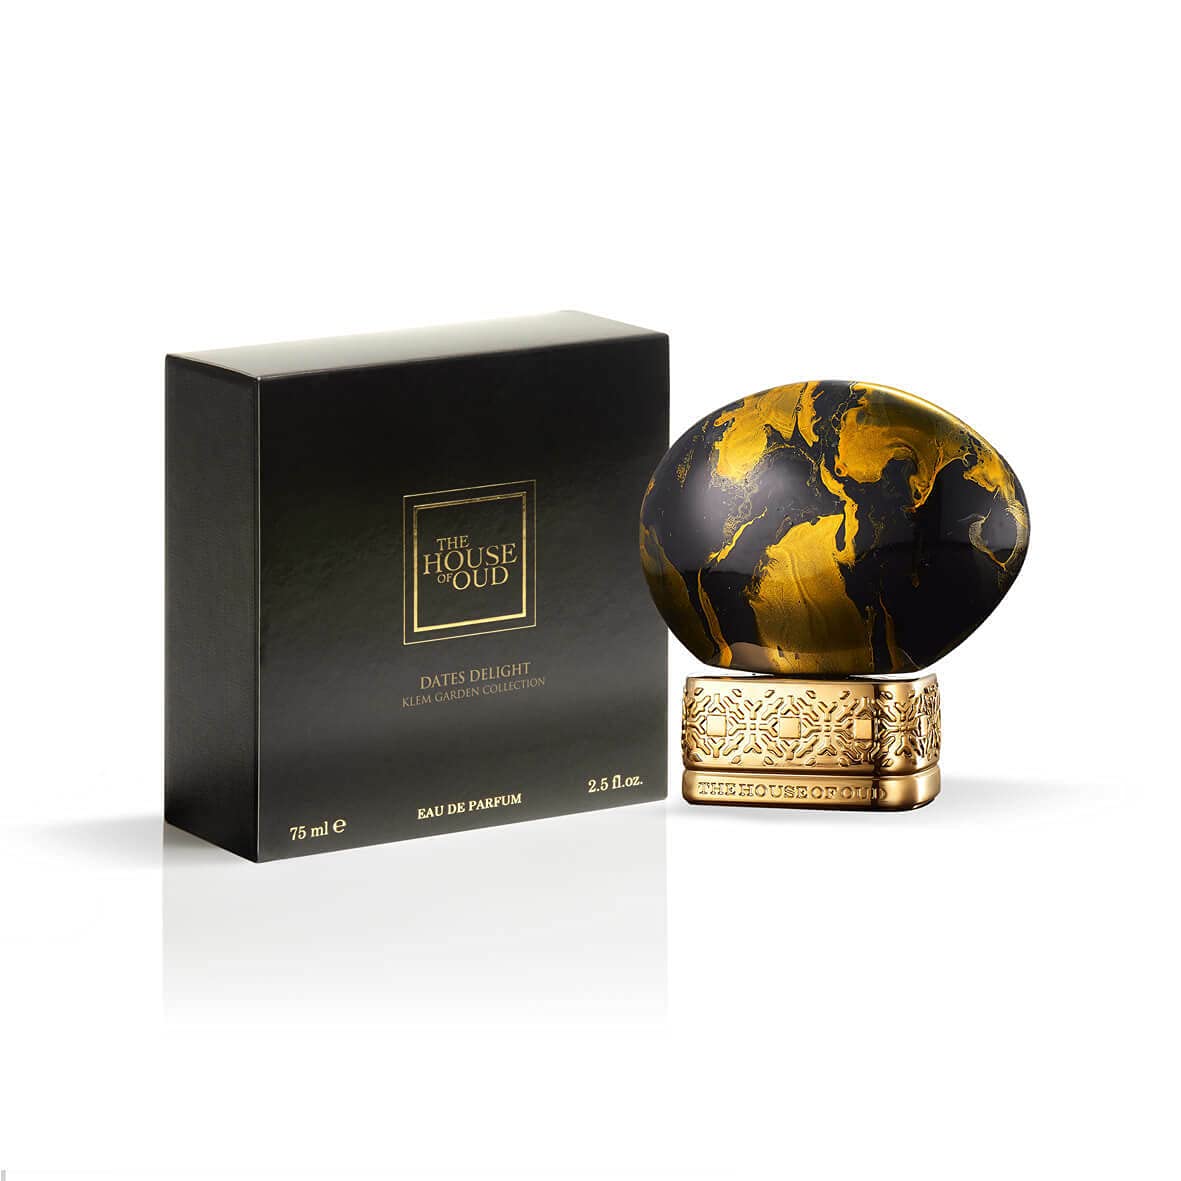 The House Of Oud Dates Delights Garden Edp